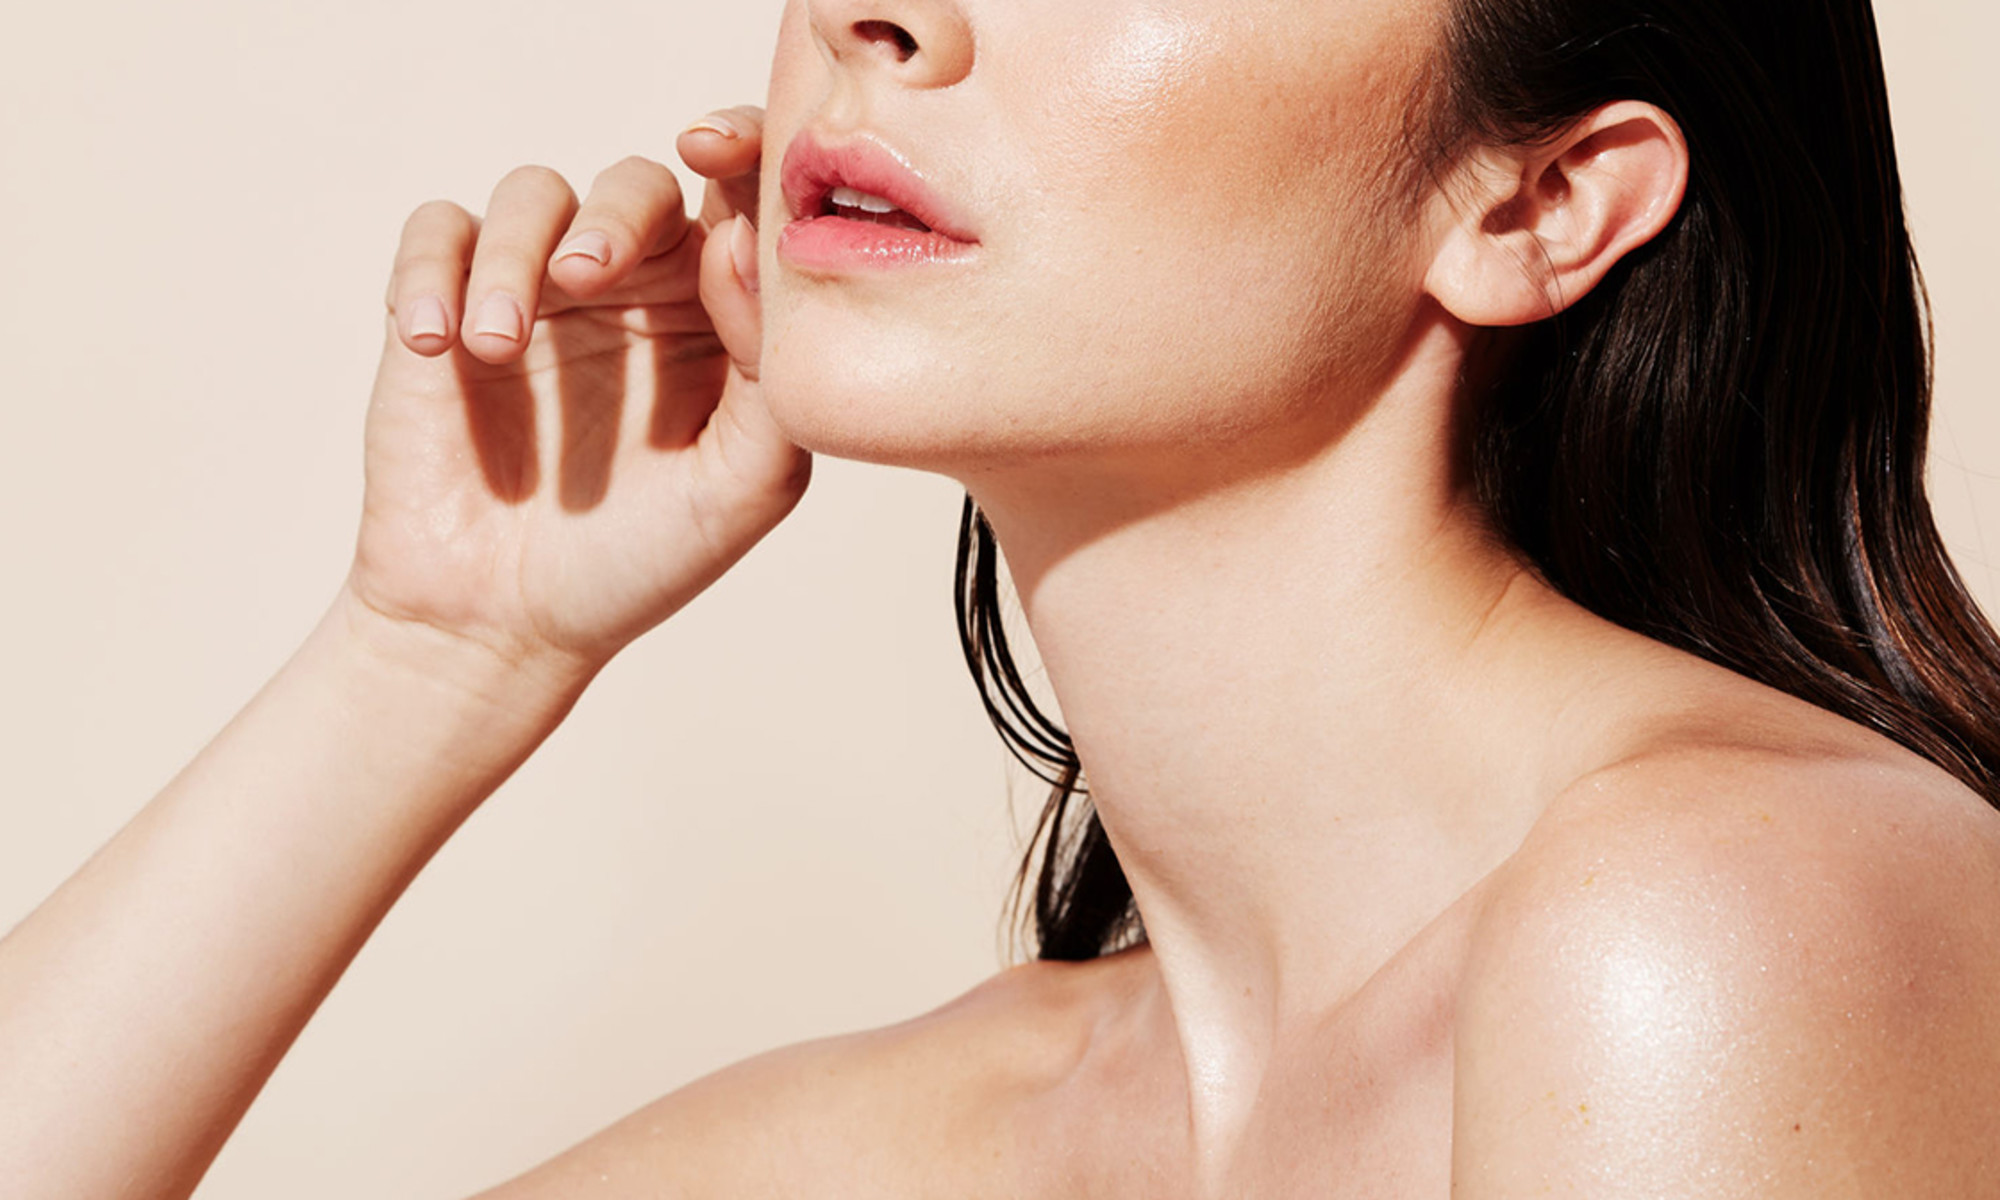 Found: A Derm's Top 3 At-Home Tips To Reverse Neck Laxity & Loose Skin